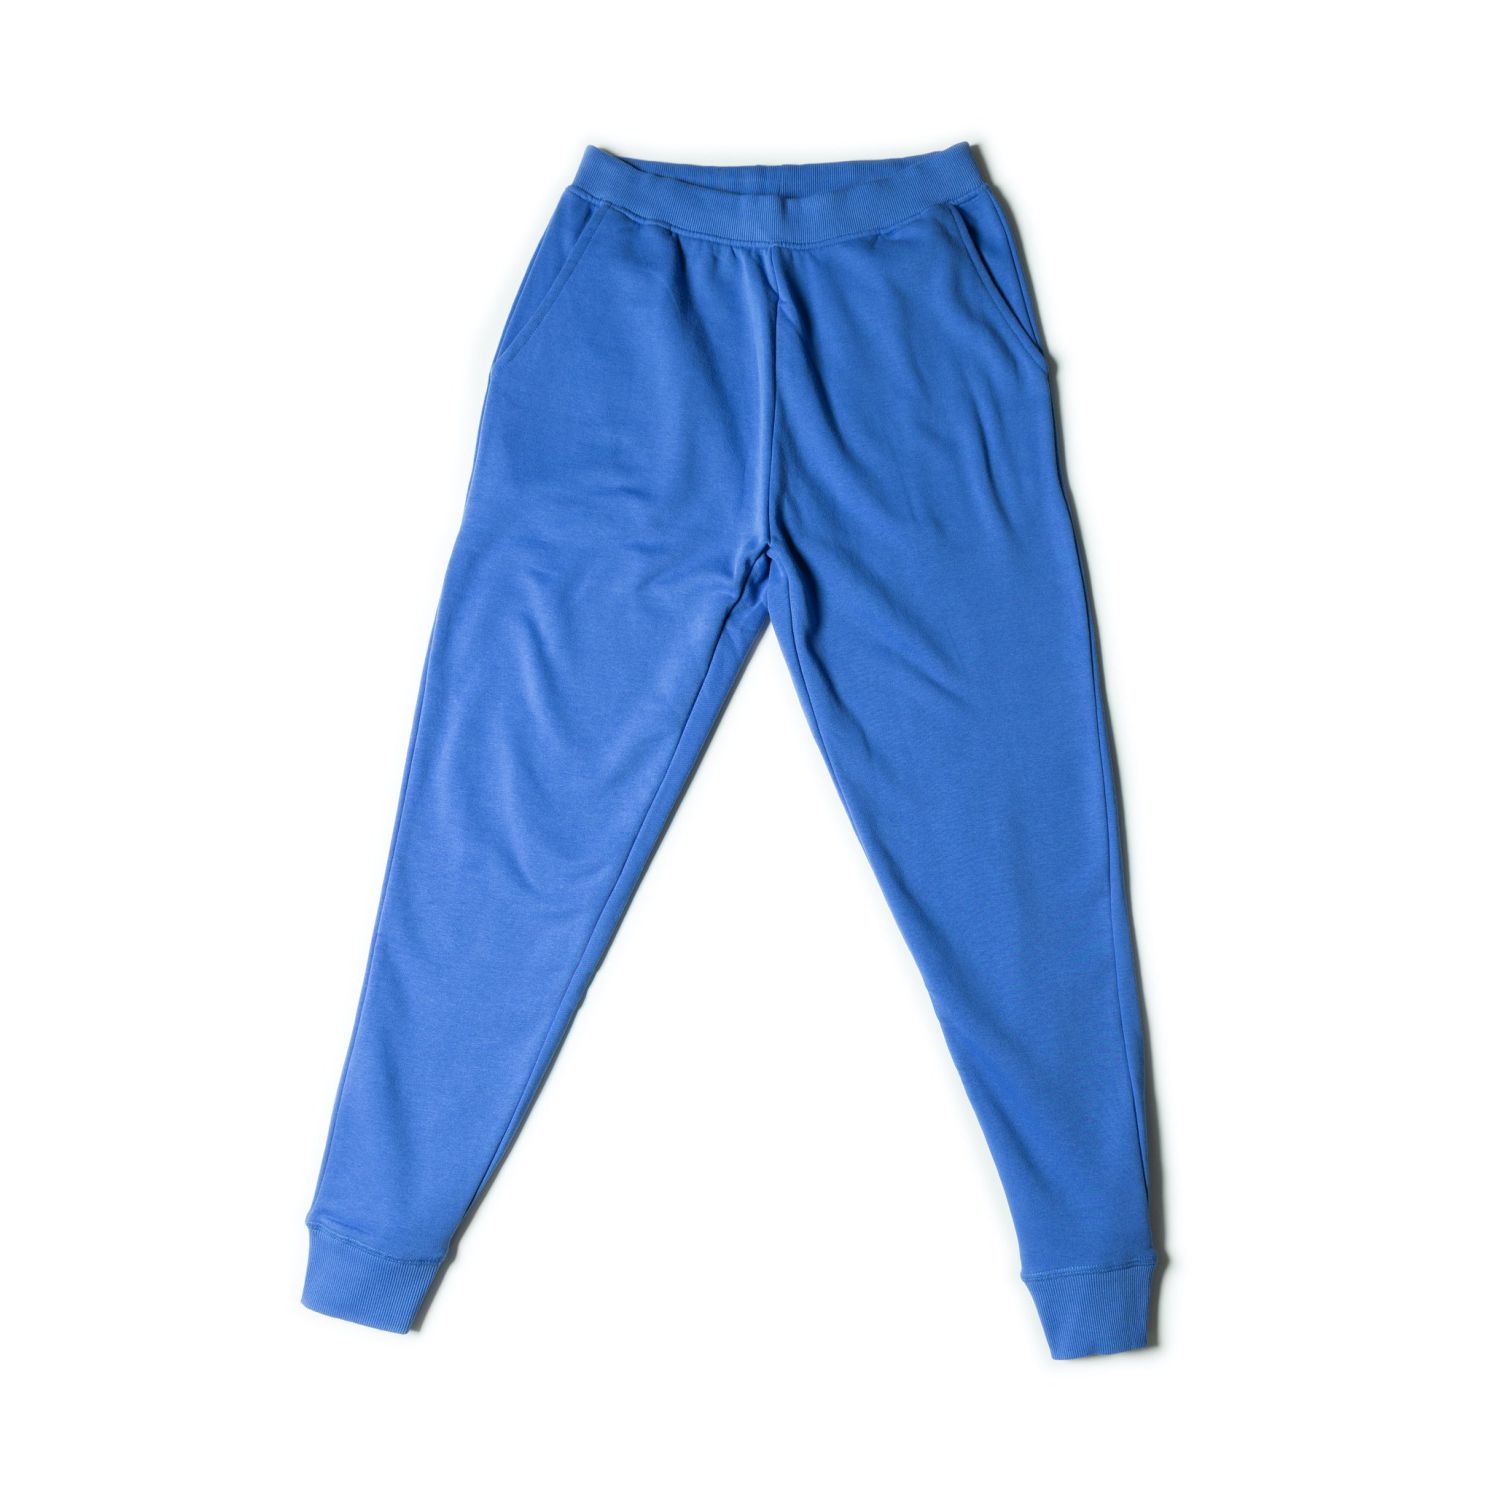 Just Like Hero Joggers #5020R Royal Blue Front